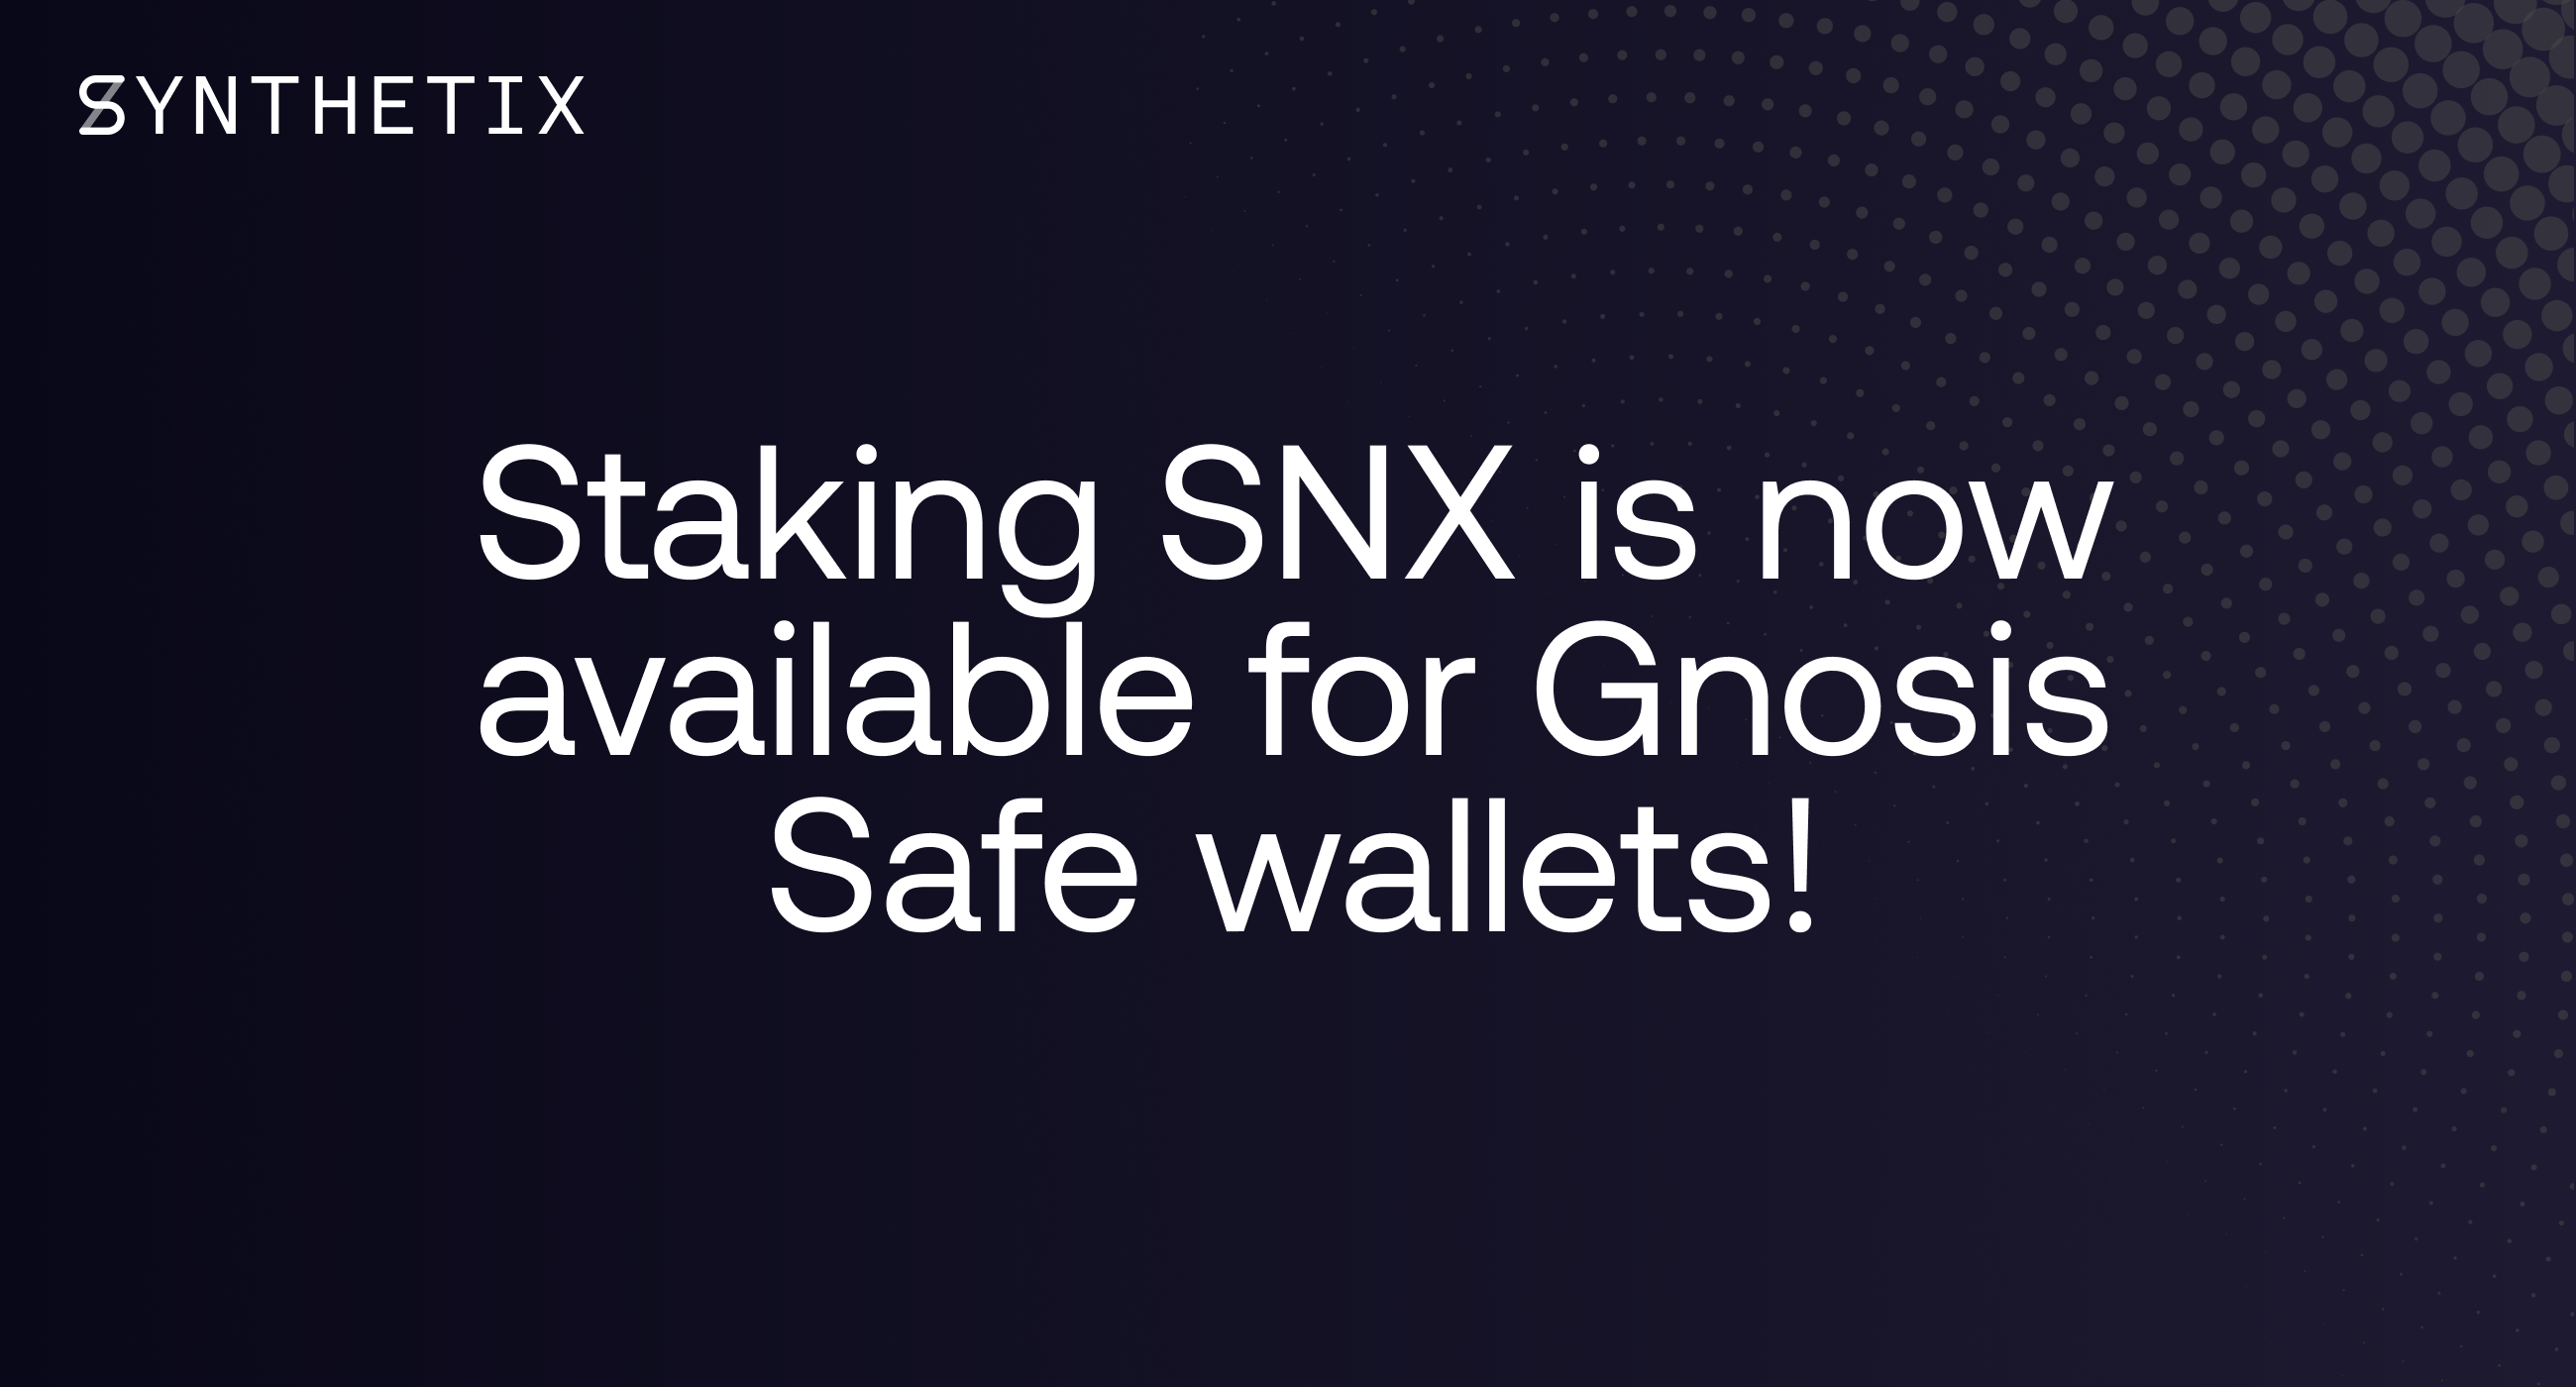 Staking SNX is now available for Gnosis Safe wallets!